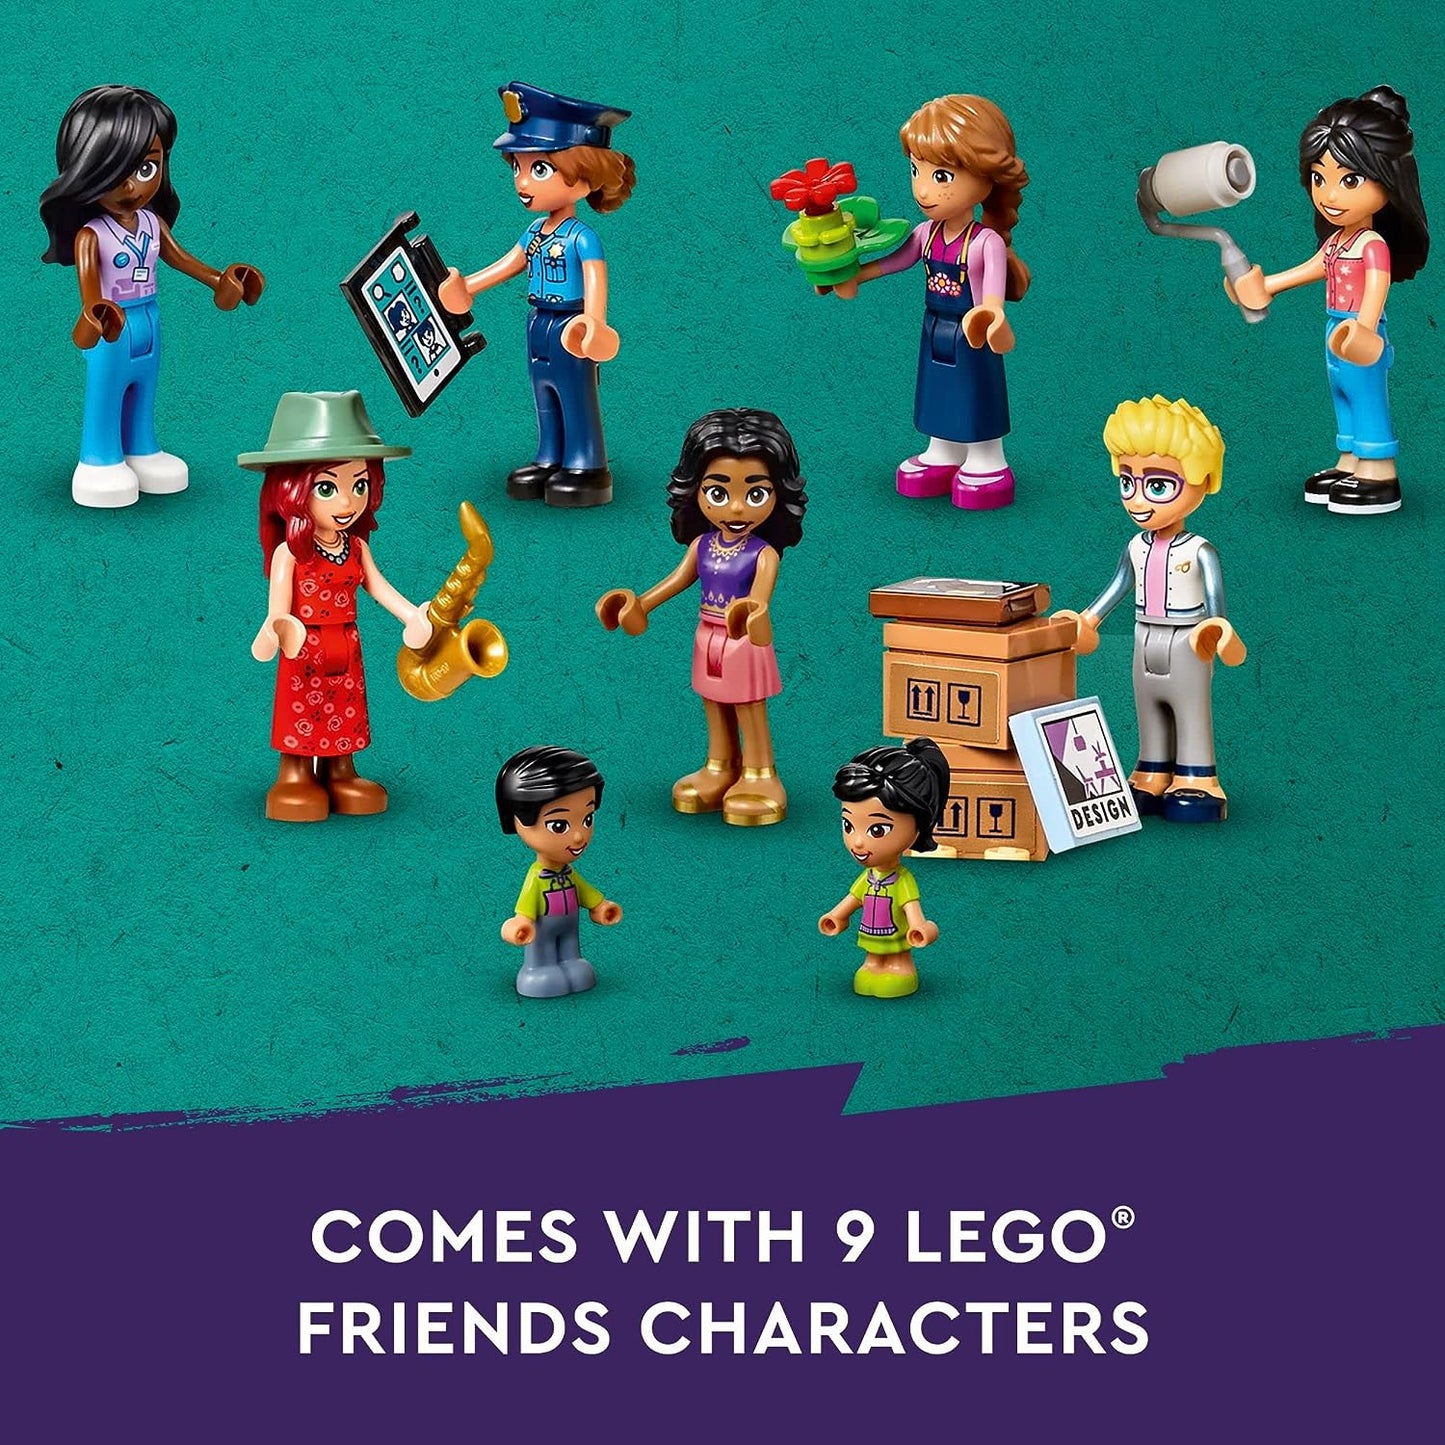 LEGO Friends - Downtown Flower and Design Stores 41732